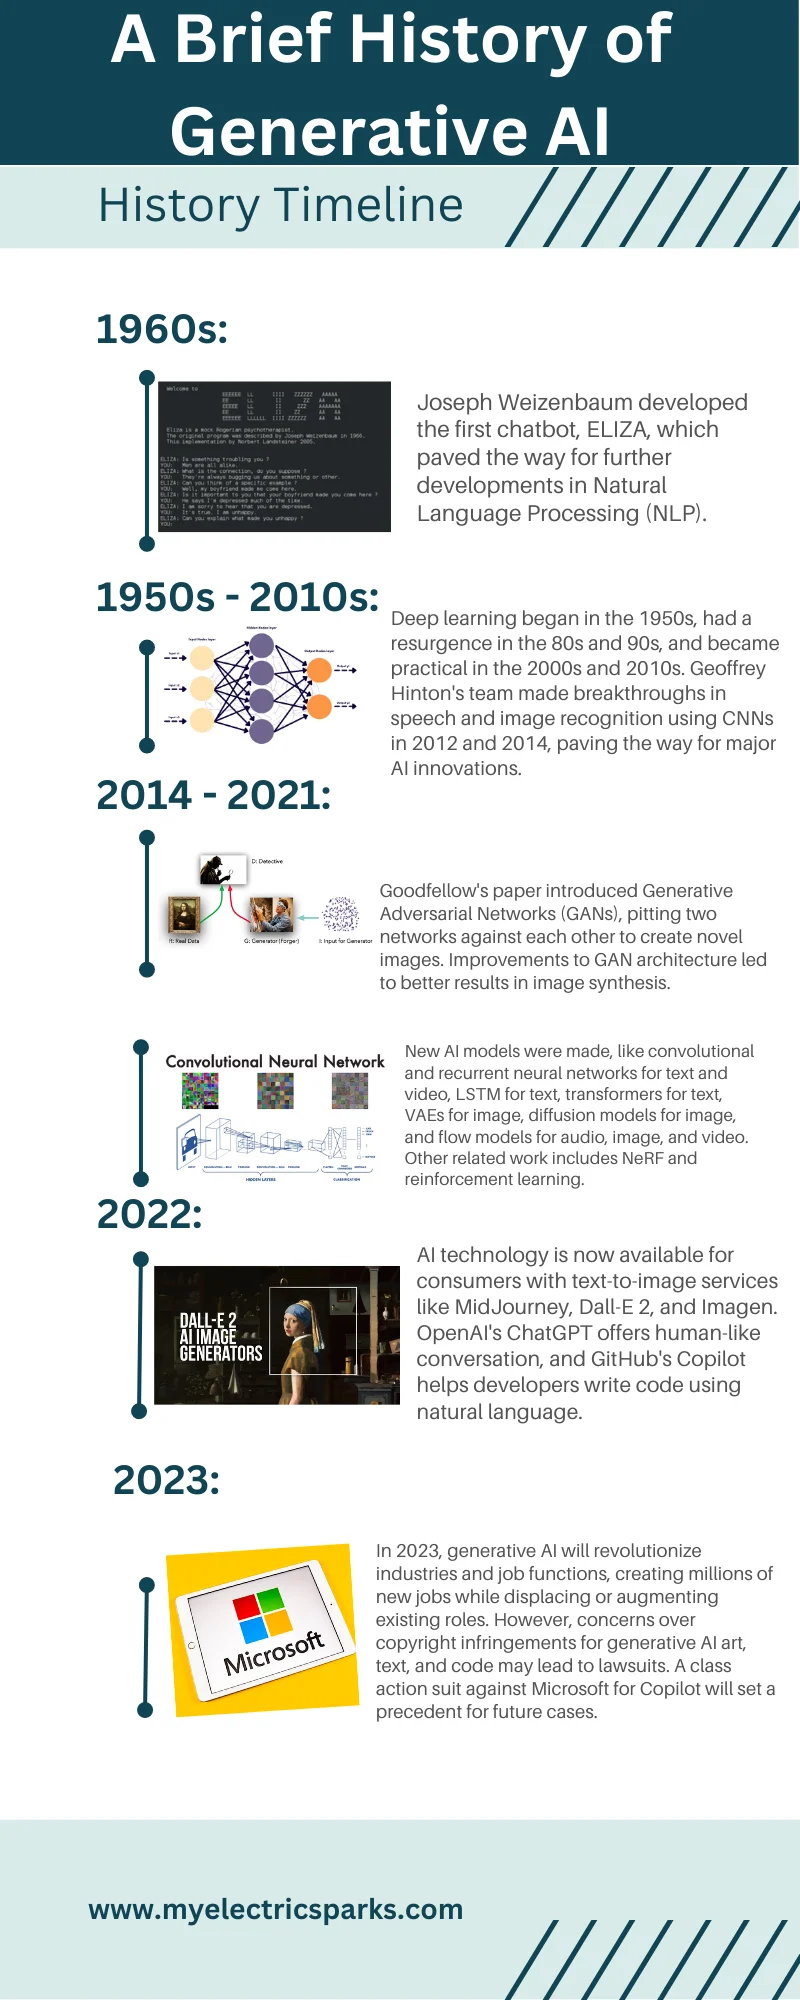 A timeline graphic showcasing the evolution of generative AI from the 1960s to 2023. The graphic displays key milestones and breakthroughs in the field, starting with the development of the first generative models in the 1960s and leading up to the current state-of-the-art techniques used in today's AI applications. The graphic is designed in a visually appealing way, with a color palette that moves from pastel shades to bold and bright colors as the timeline progresses, emphasizing the growth and progress of generative AI over time.